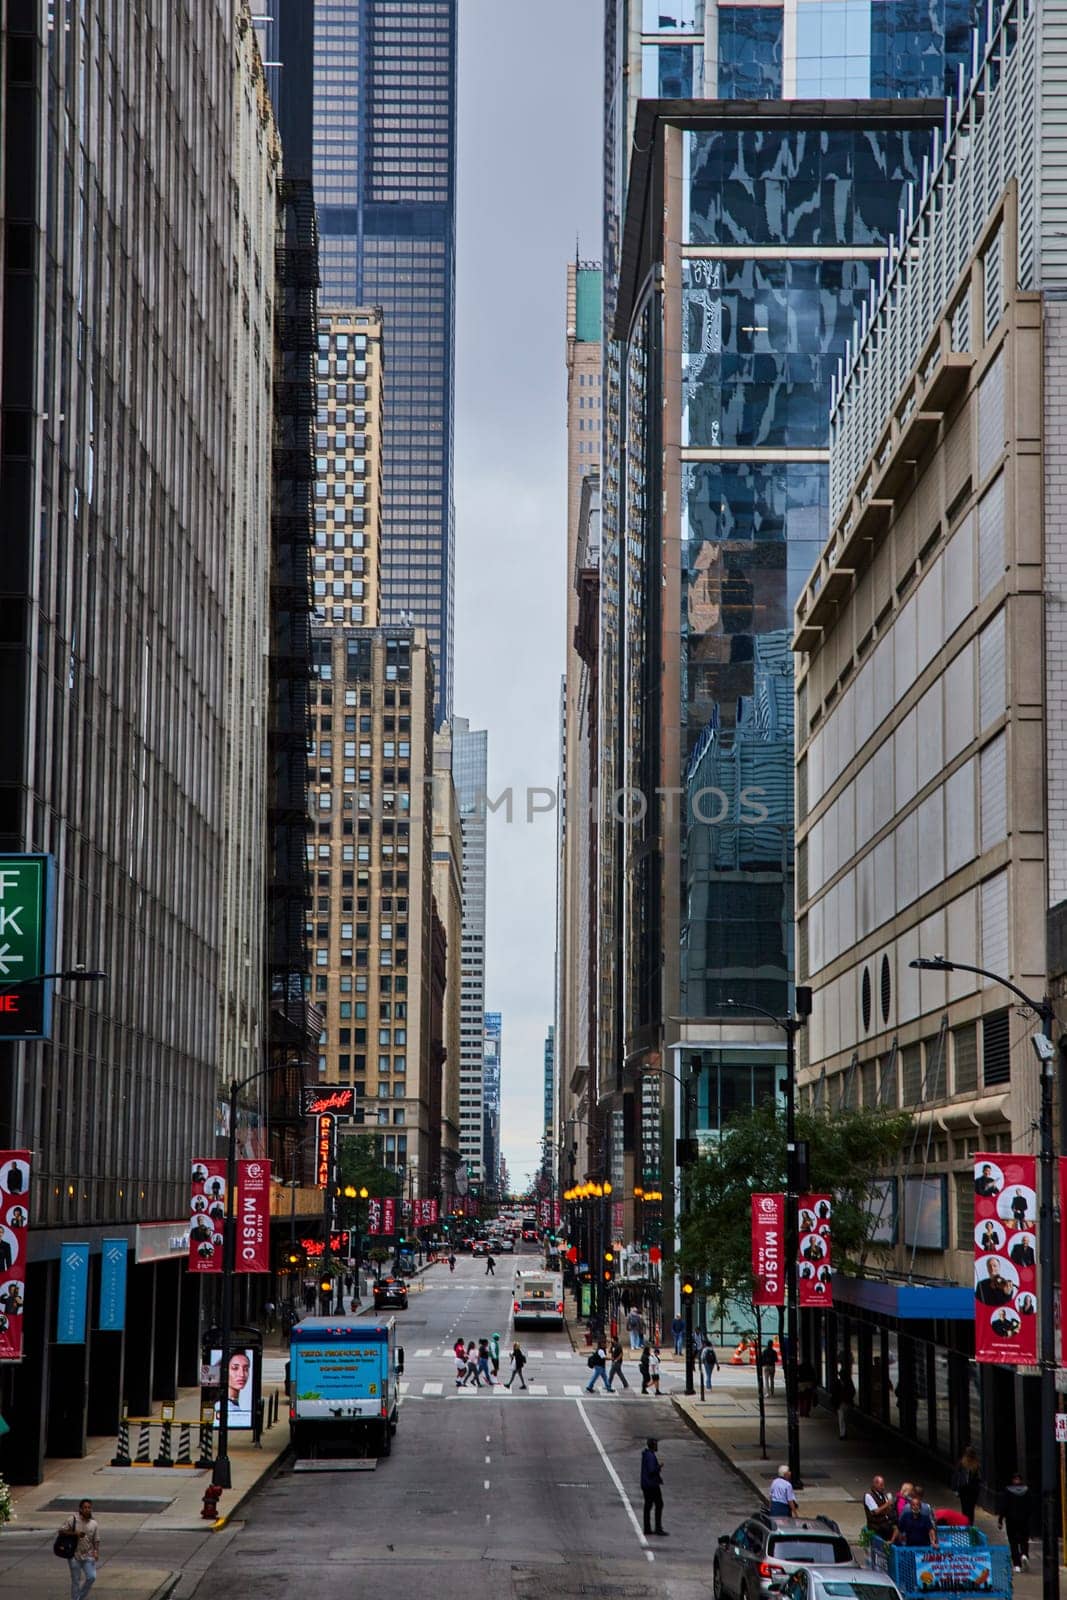 Tourists and pedestrians on Chicago street corridor between skyscraper buildings on gloomy day by njproductions